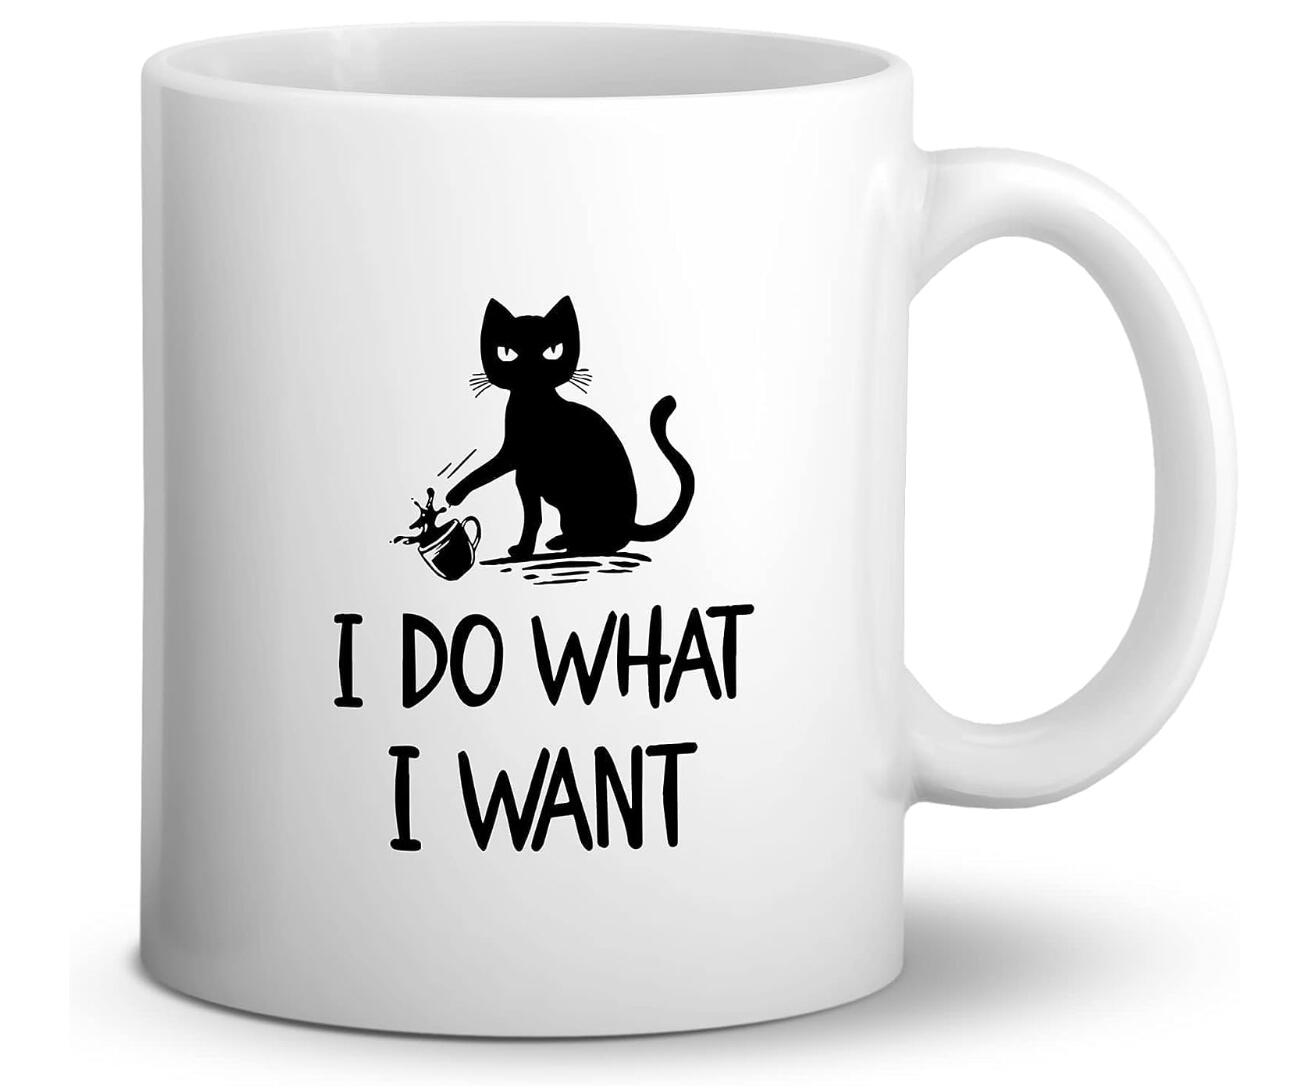 I Do What I Want Coffee Mug Funny Cat Pet Lover Gift Cup